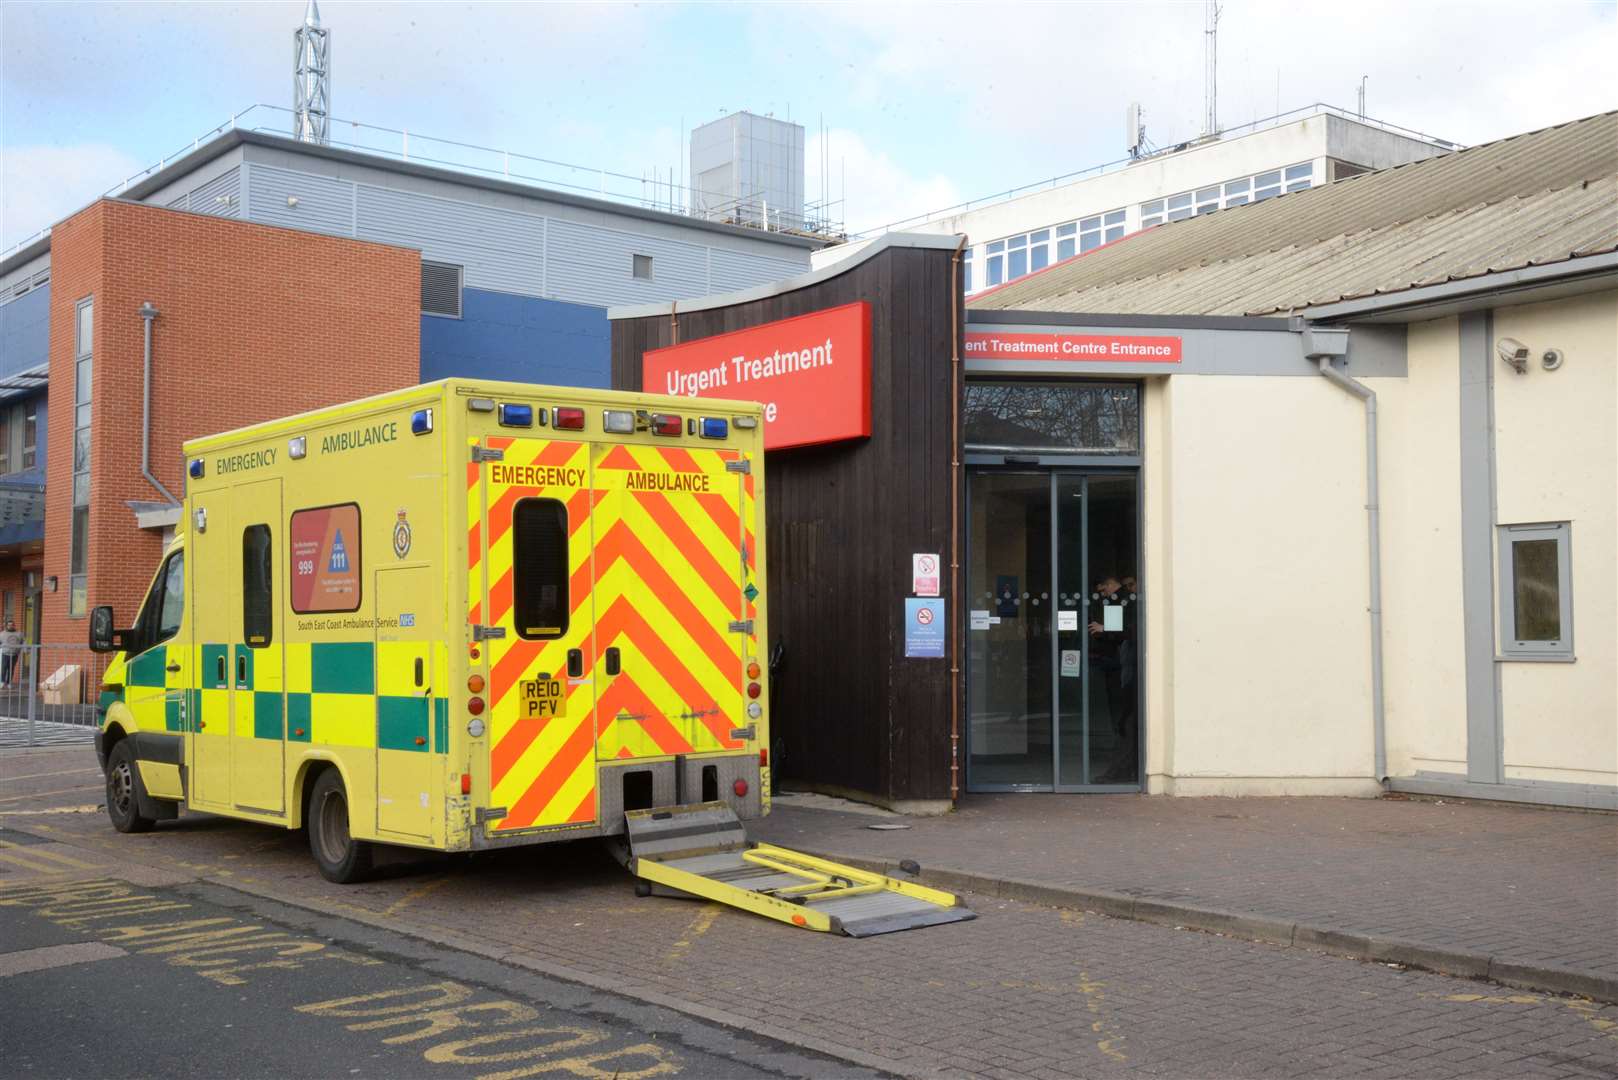 An ambulance at Medway Maritime Hospital where it's reported there have been five-hour waits to transfer patients